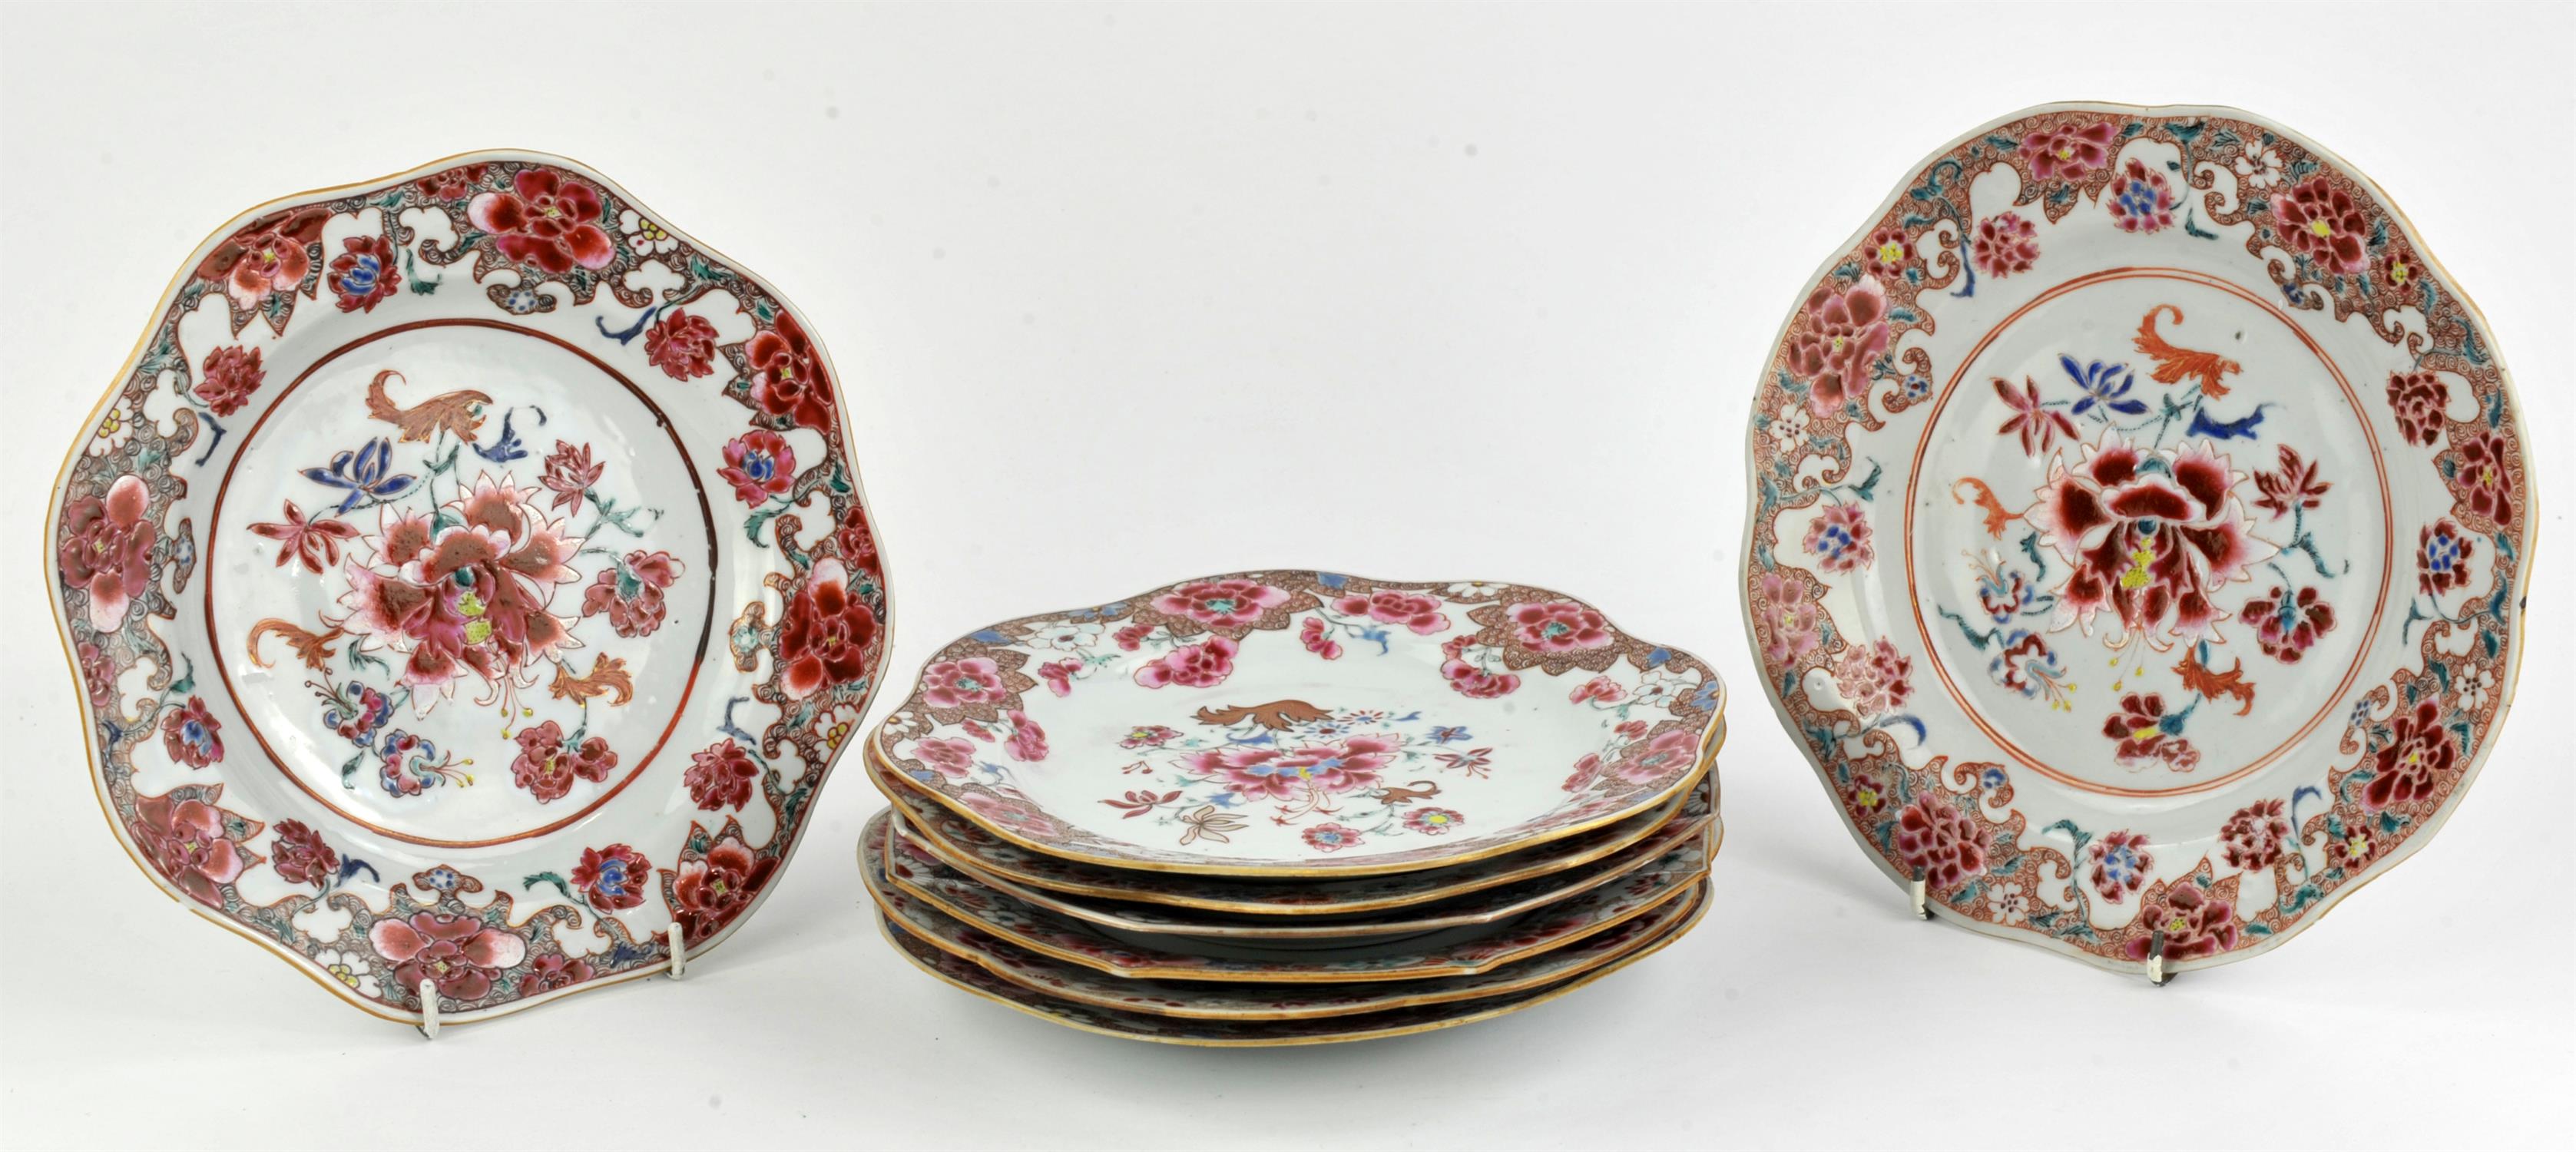 Eight famille rose dishes; each one decorated with floral designs and about 22.5 cm diameter, - Image 18 of 28